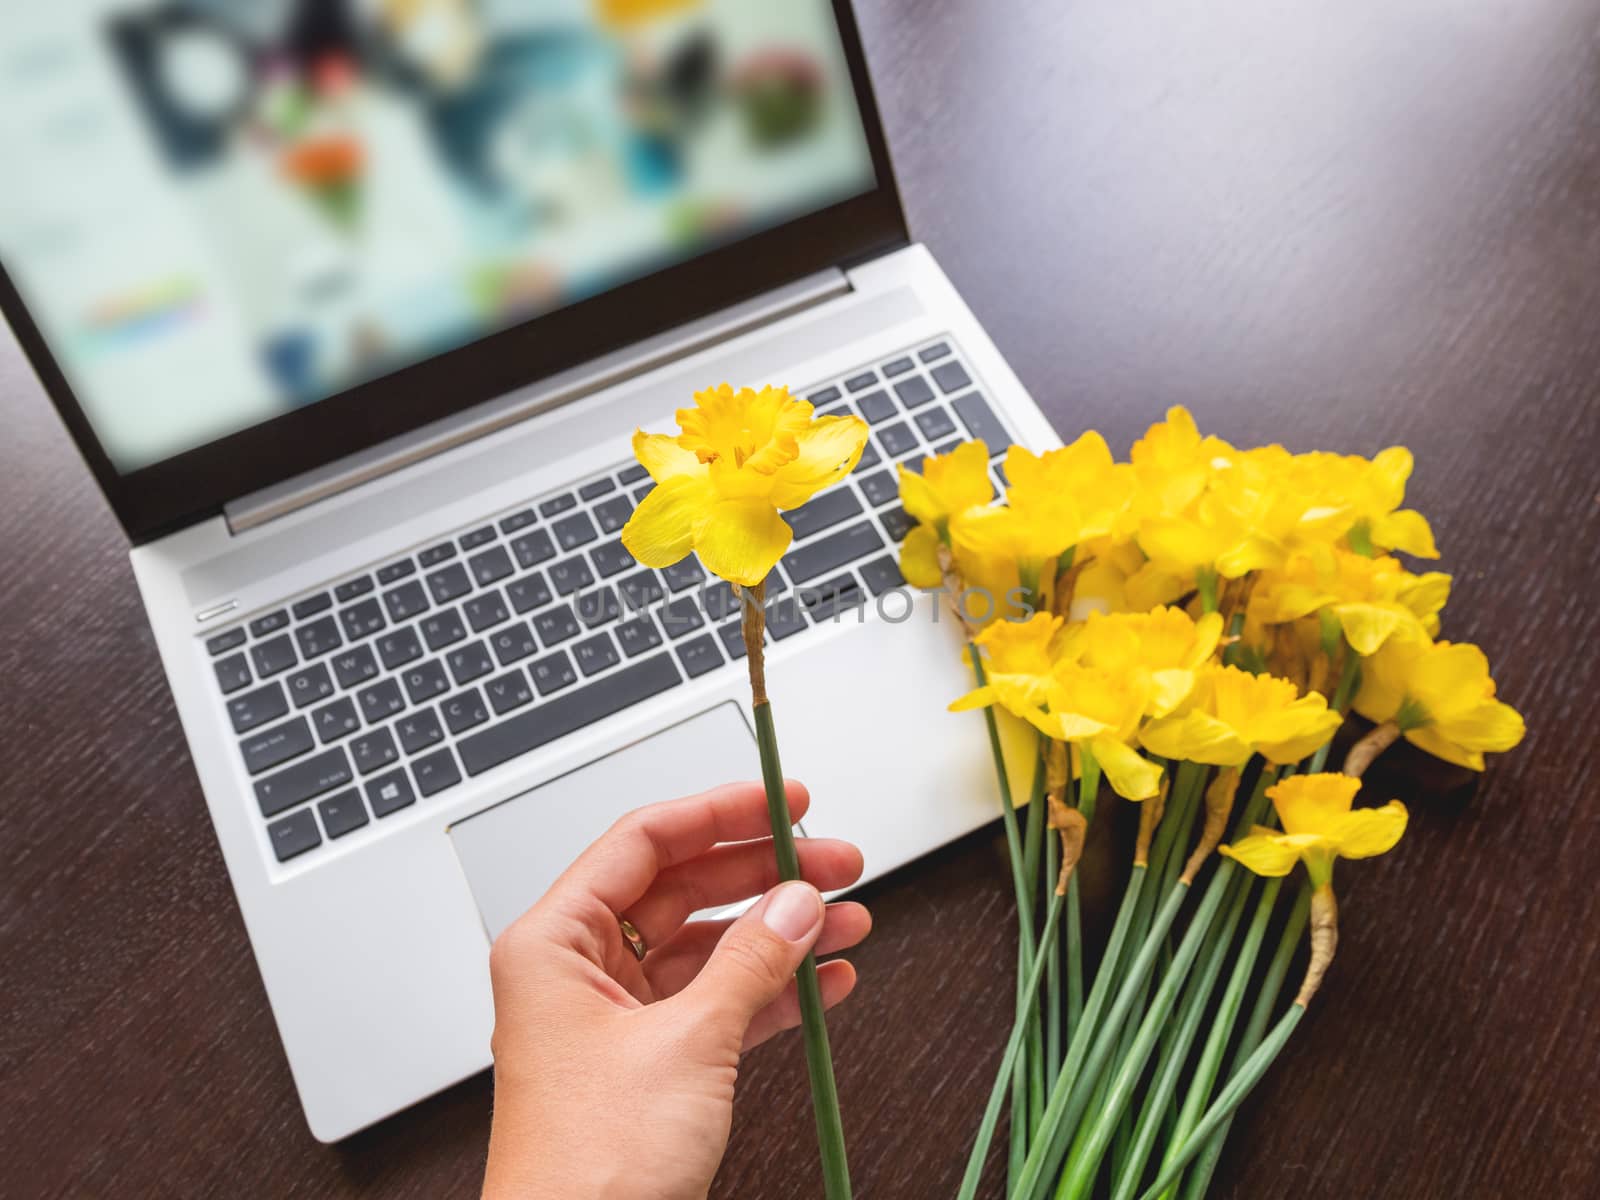 Bouquet of Narcissus or daffodils lying on silver metal laptop. Bright yellow flowers on portable device and in woman's hand. Wooden background.